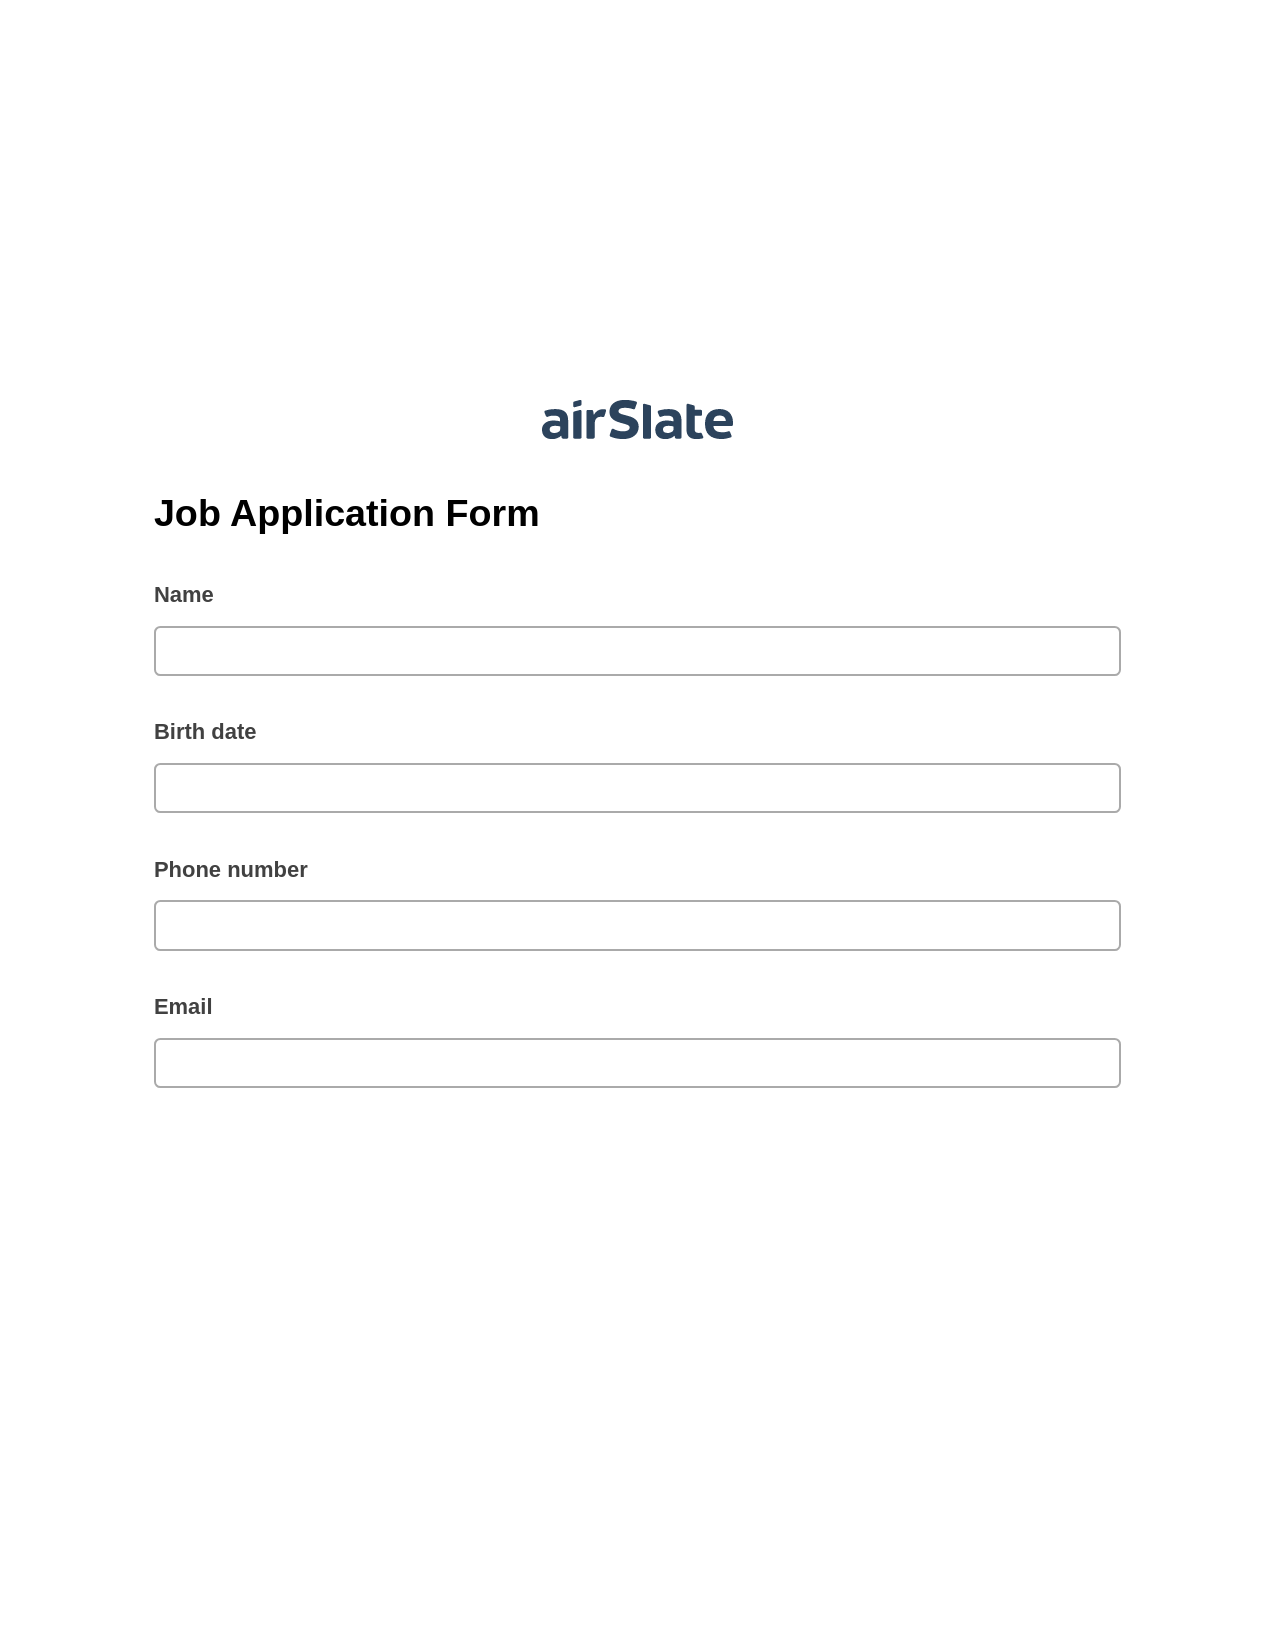 Job Application Form Pre-fill from Google Sheets Bot, Create Slate Reminder Bot, Post-finish Document Bot